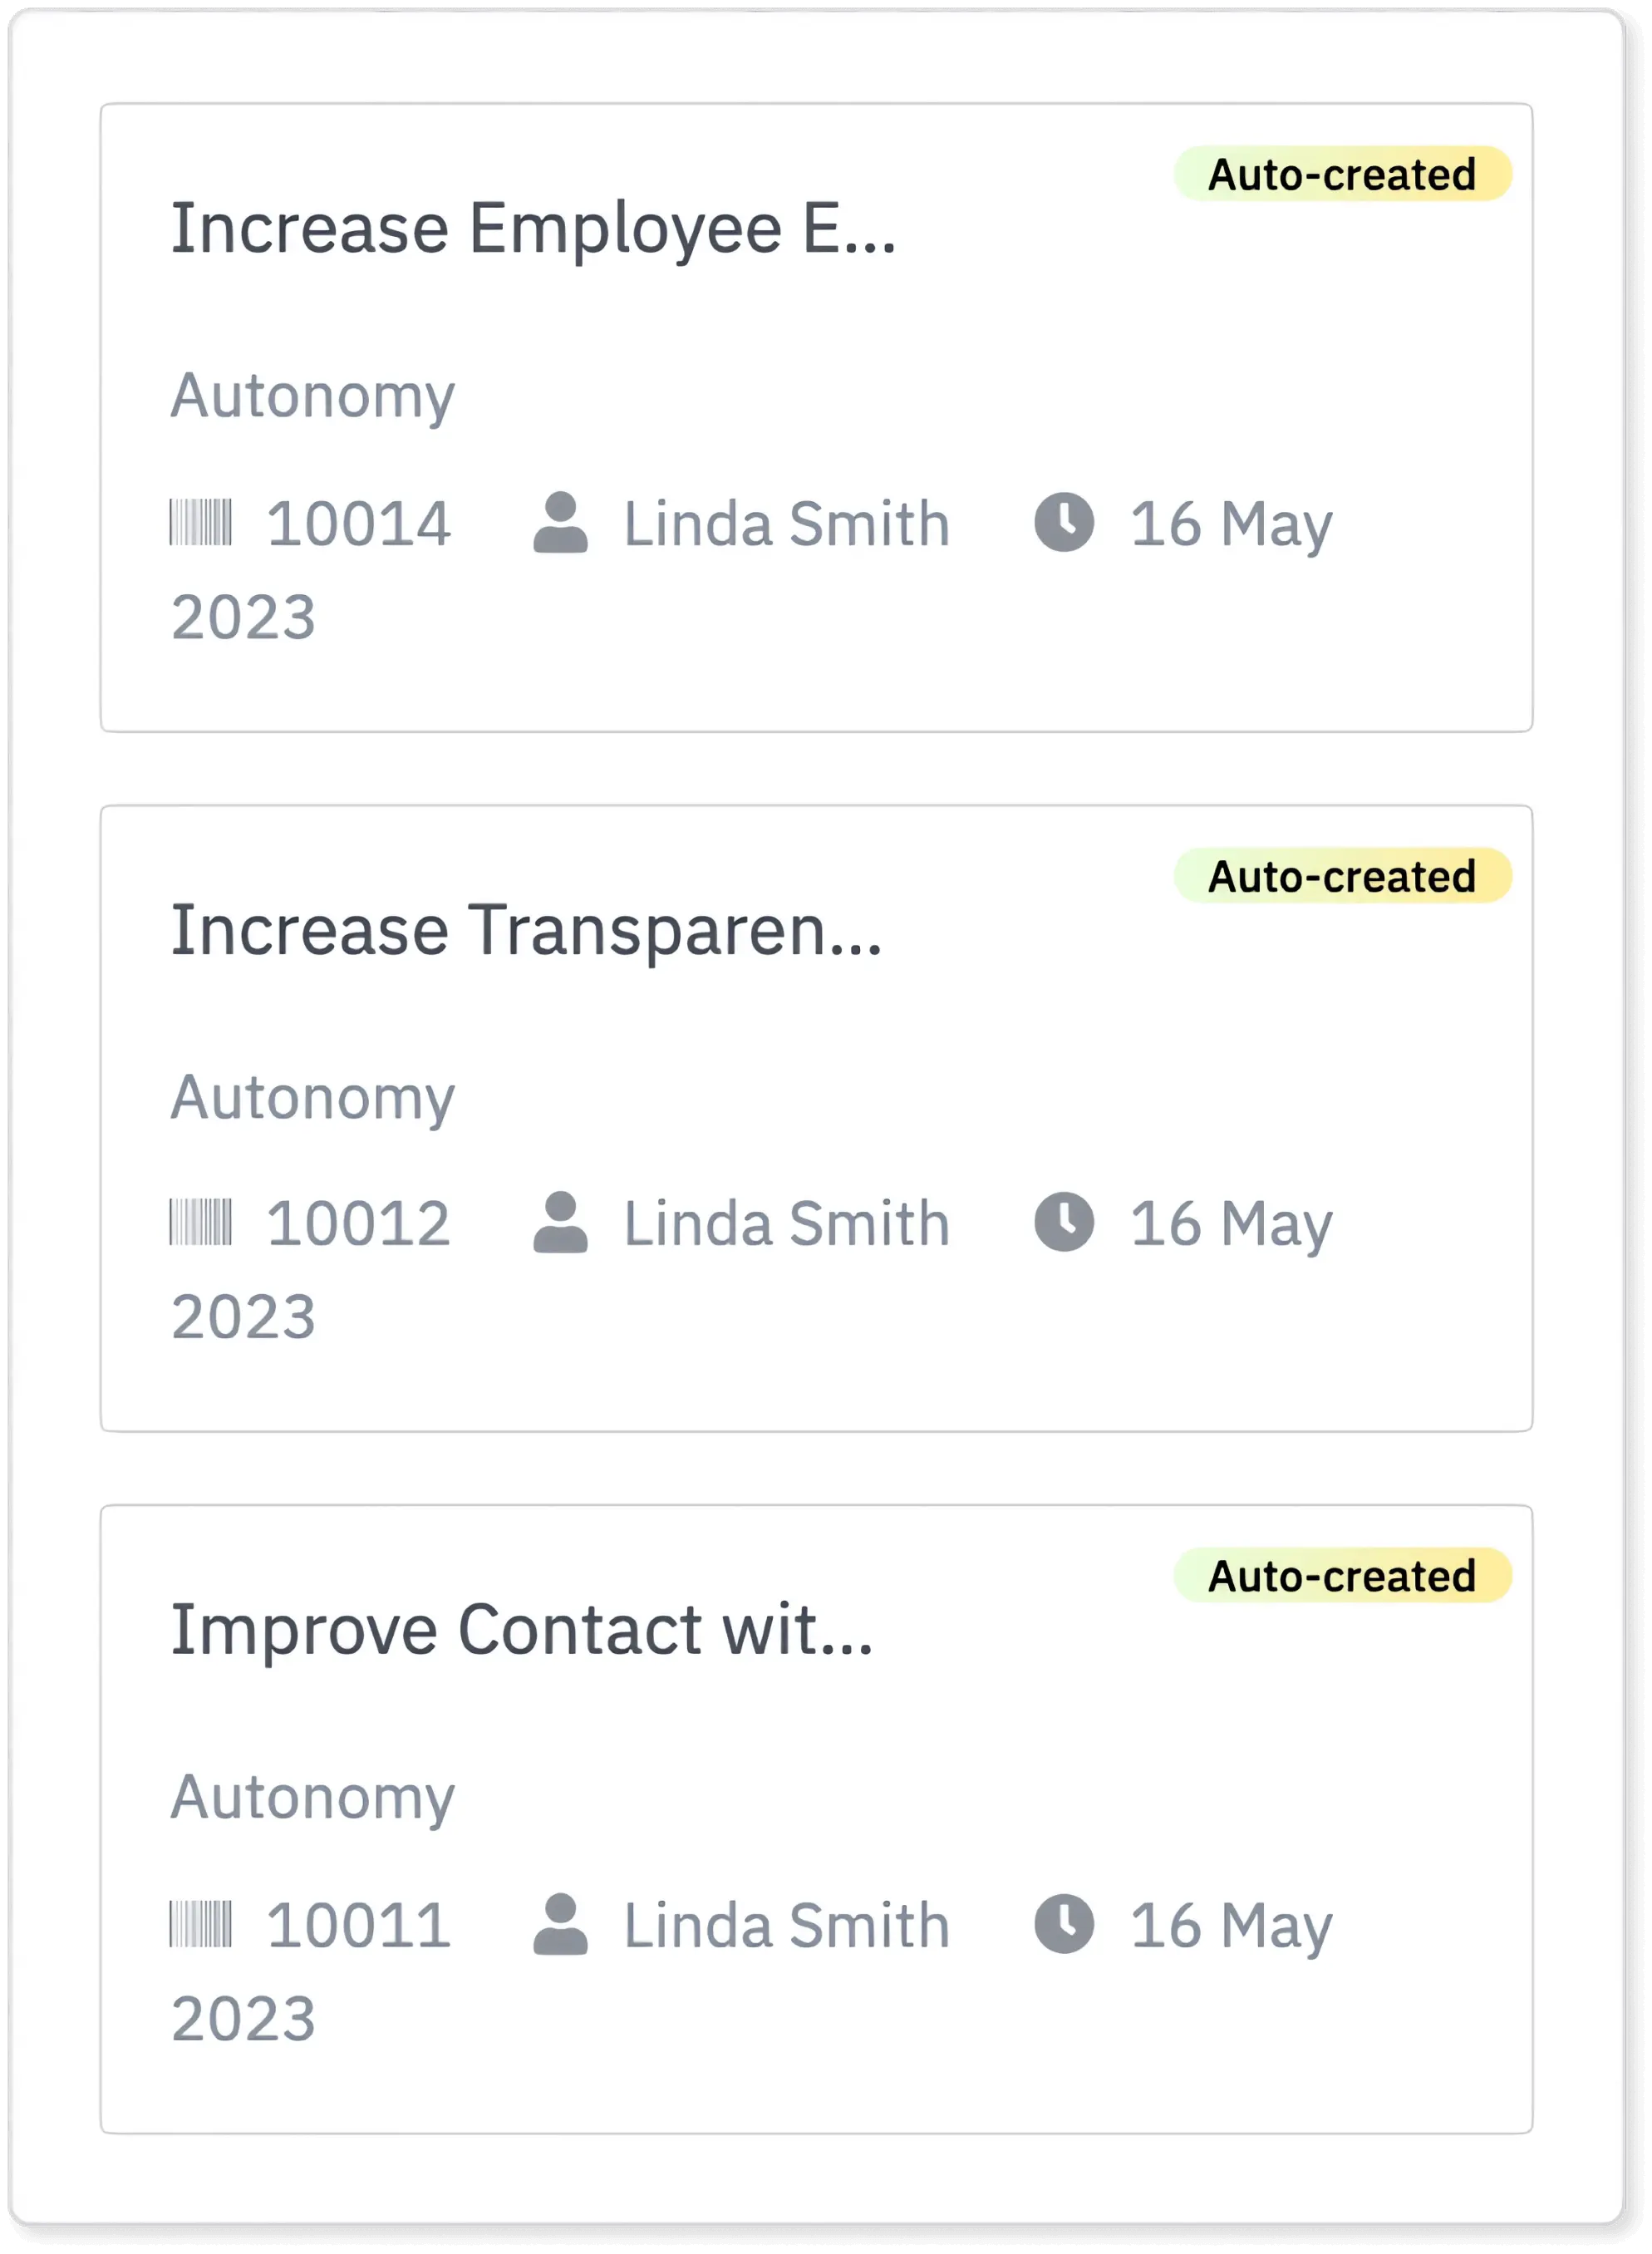 Take relevant AI suggested actions for employee feedback received